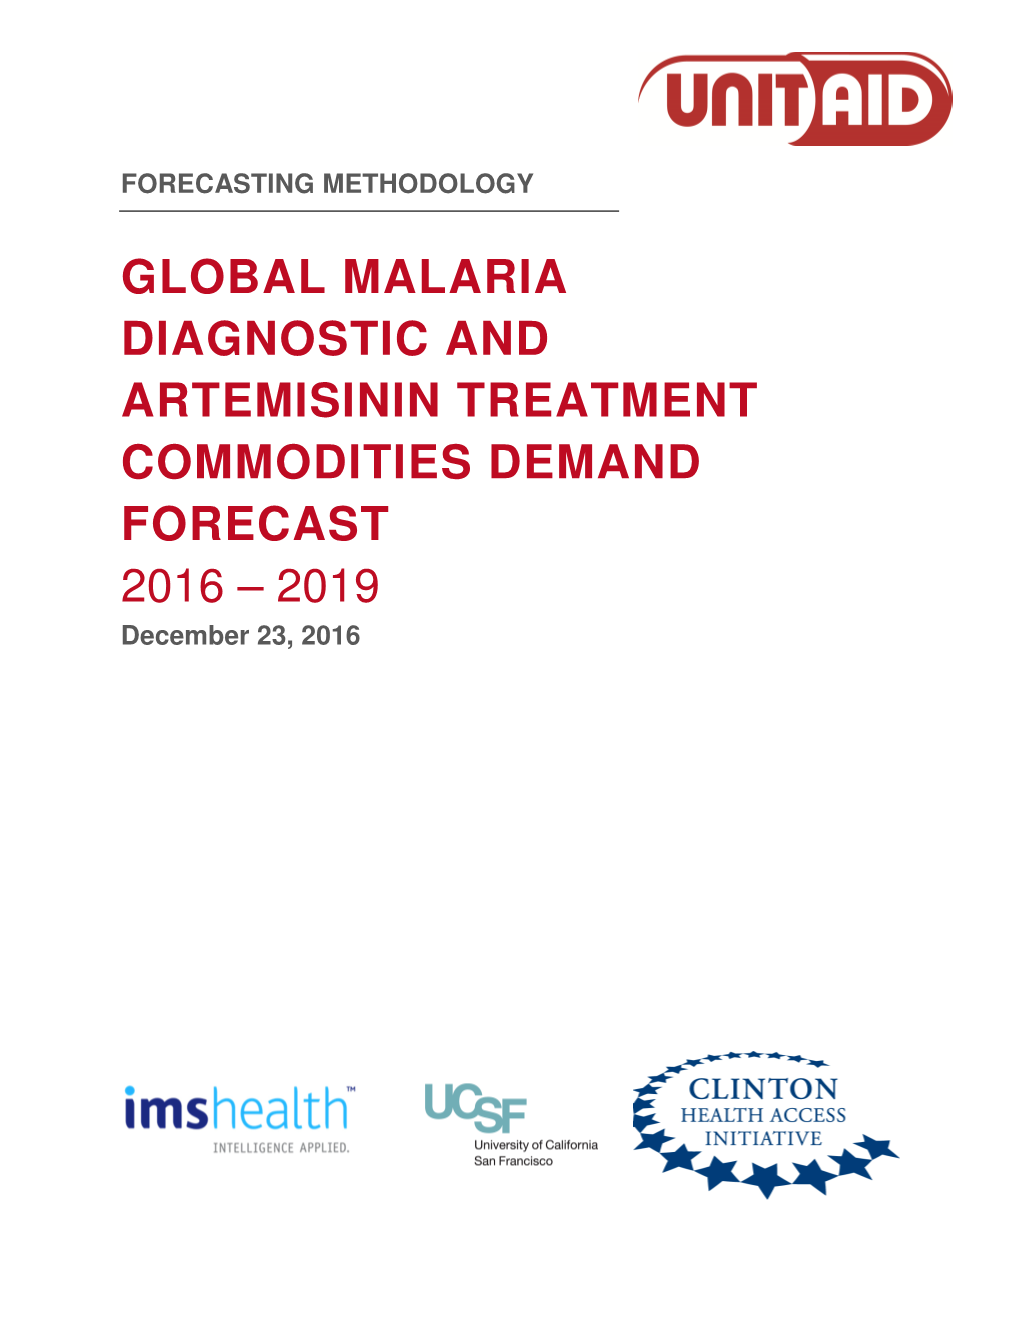 Global Malaria Diagnostic and Artemisinin Treatment Commodities Demand Forecast: Methodology – Page 2 Updated December 2016